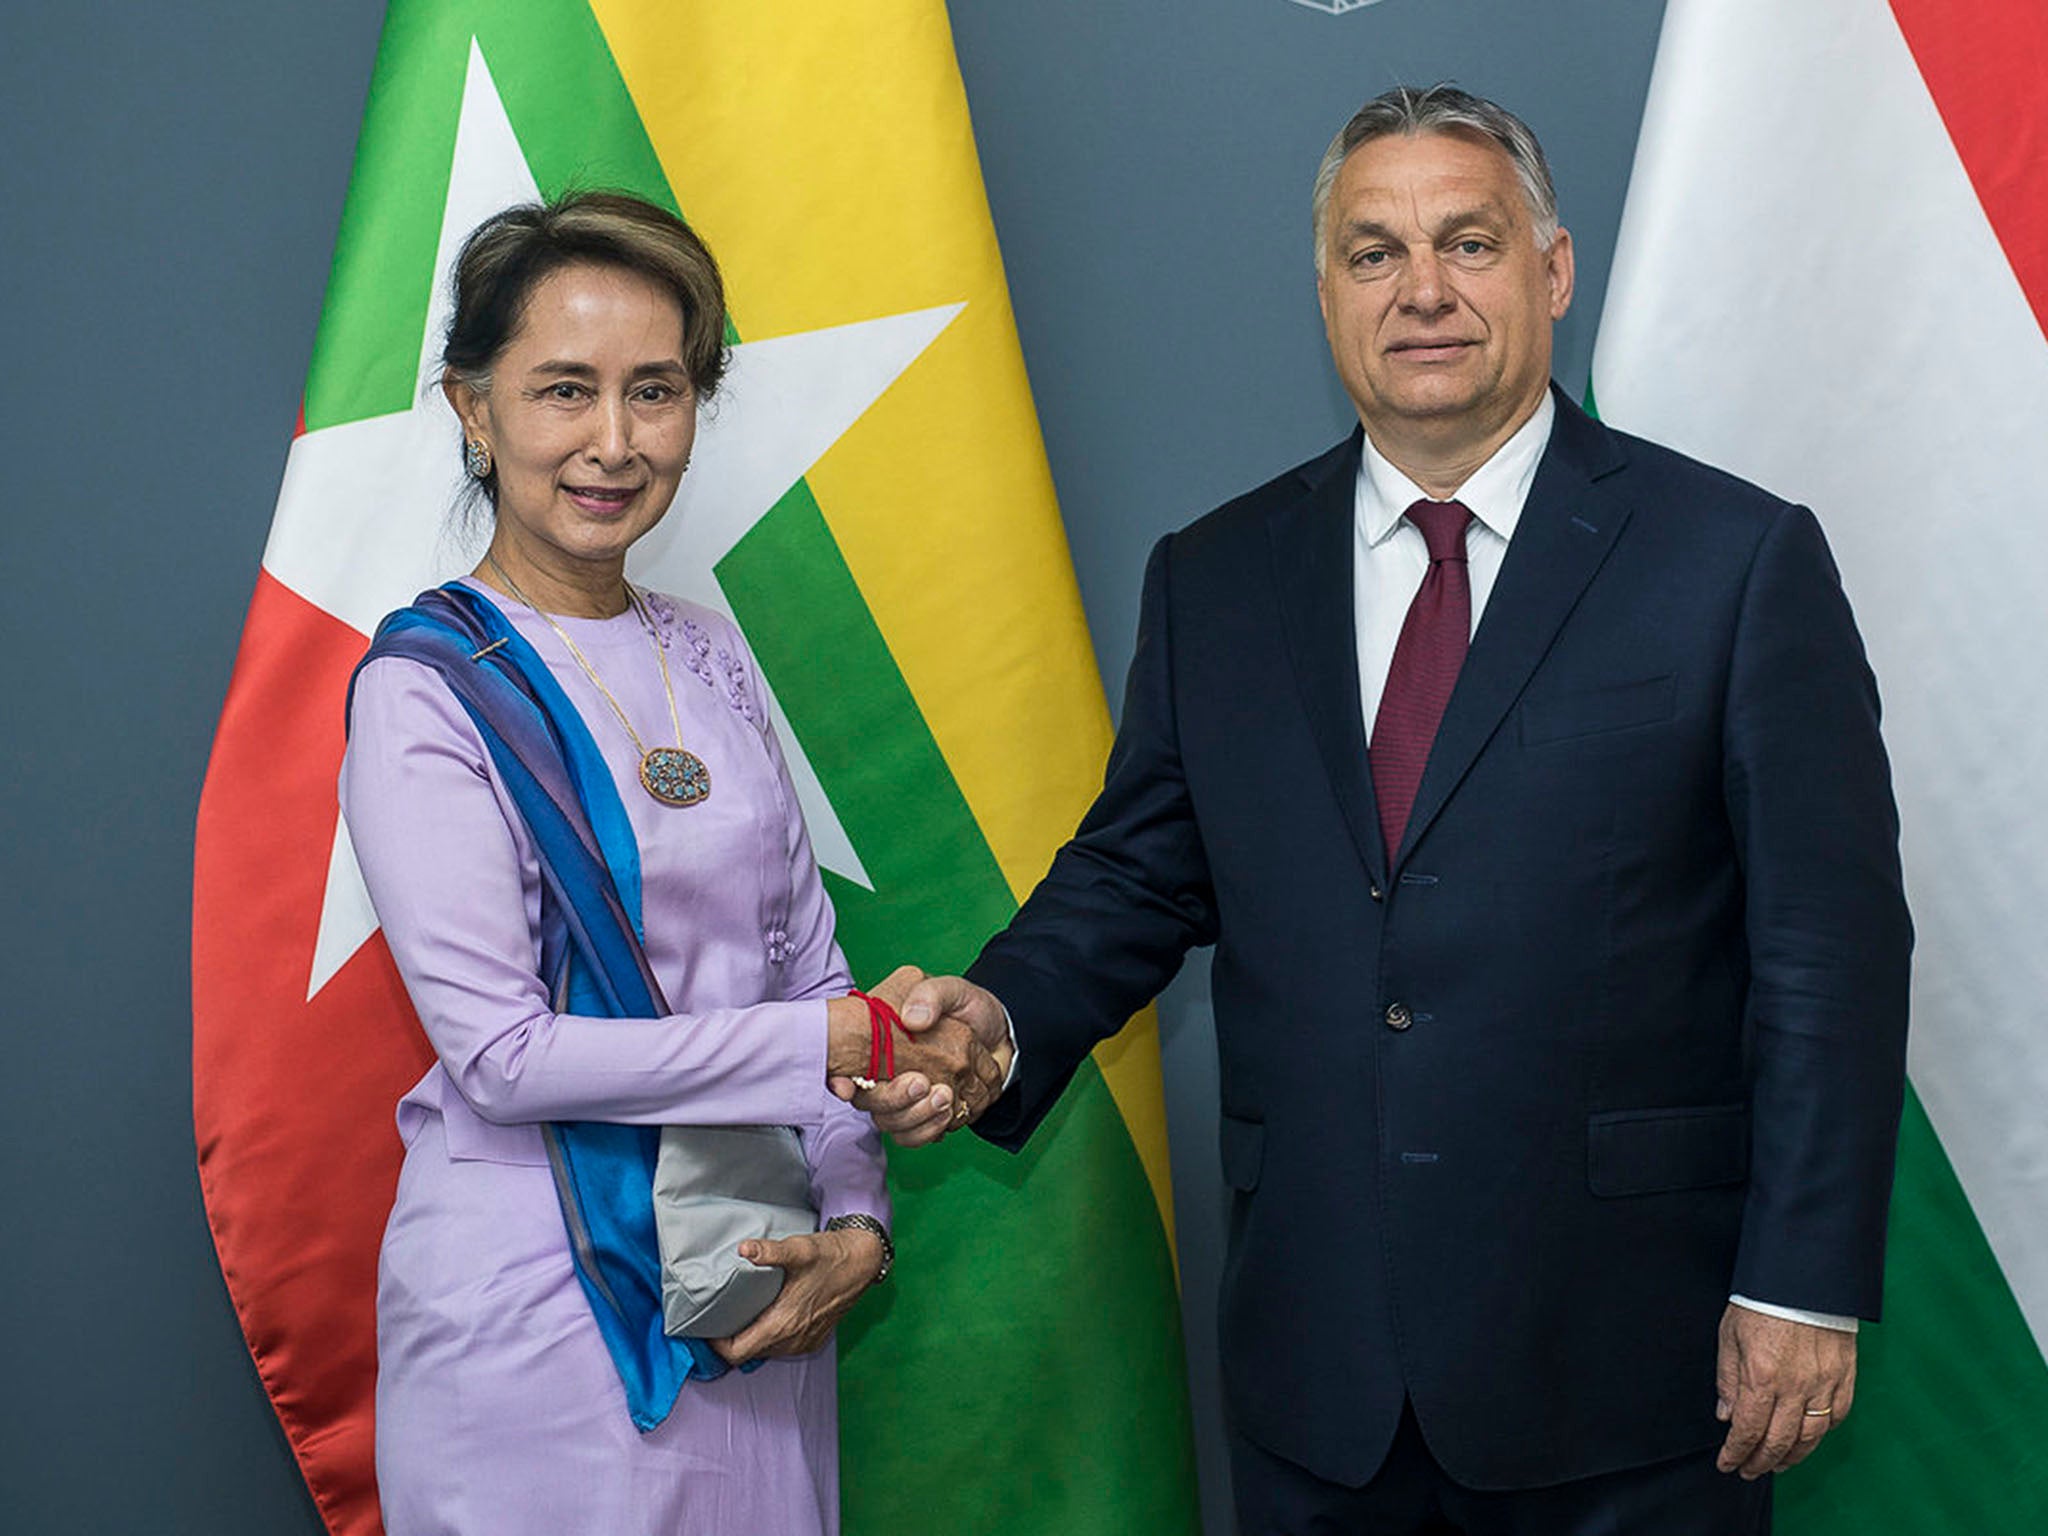 Orban says his people have great respect for Suu Kyi and ‘all she has done for her country’s democratic transformation’